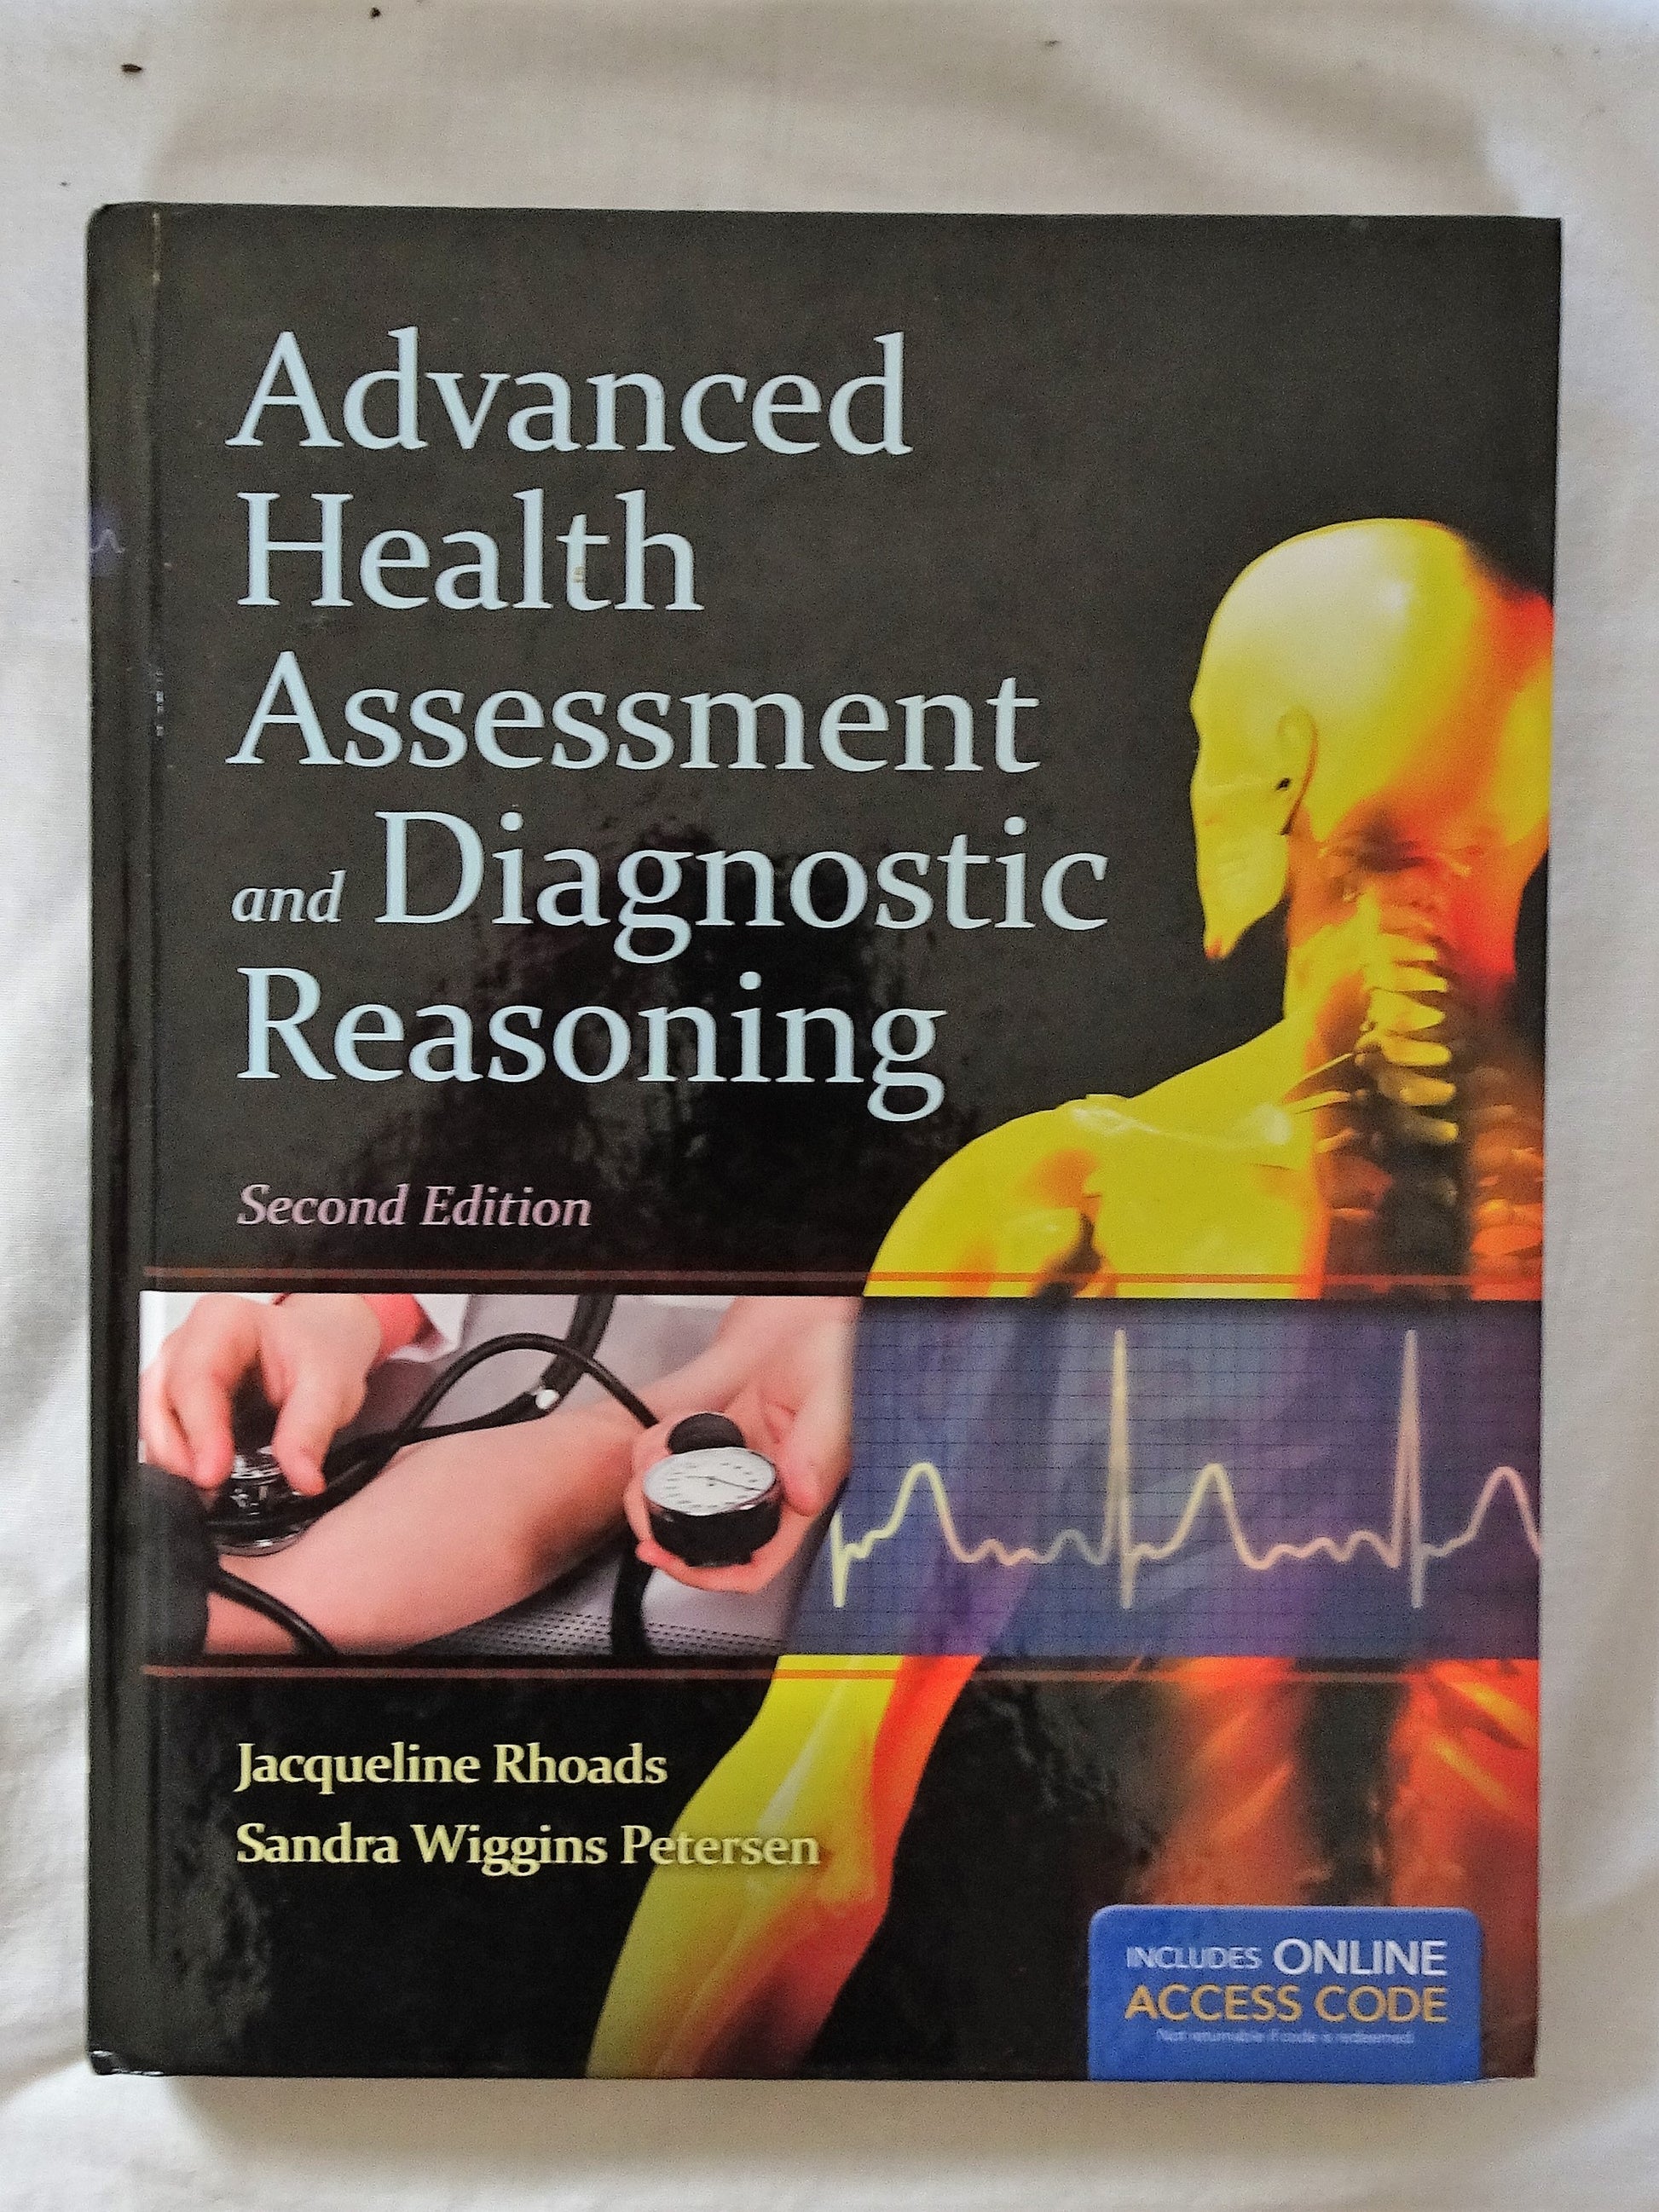 Advanced Health Assessment and Diagnostic Reasoning by Rhoads & Petersen